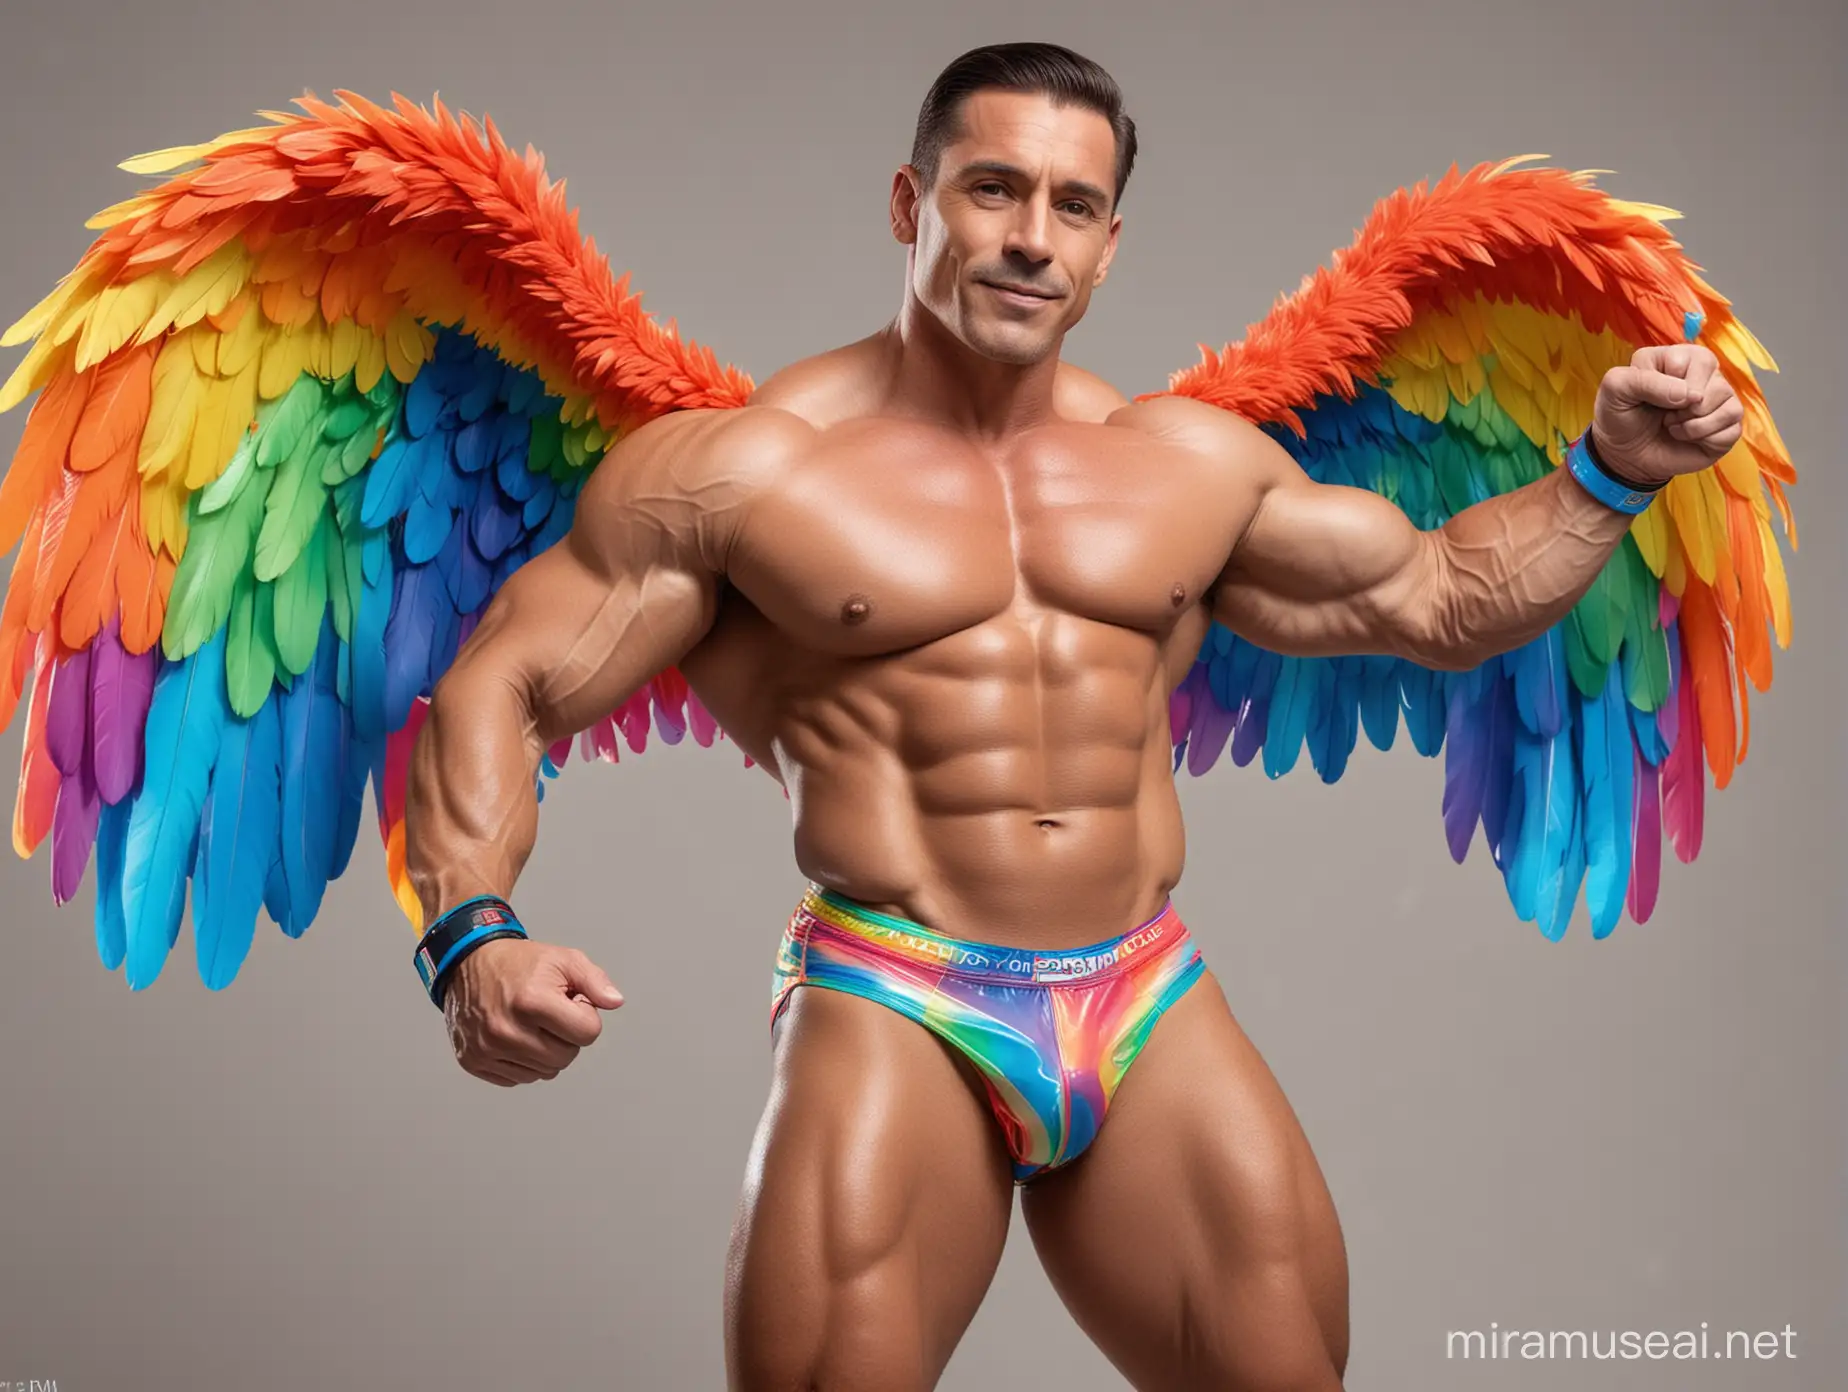 Ultra Beefy Bodybuilder Flexing in Rainbow Colored Eagle Wings Jacket with Doraemon